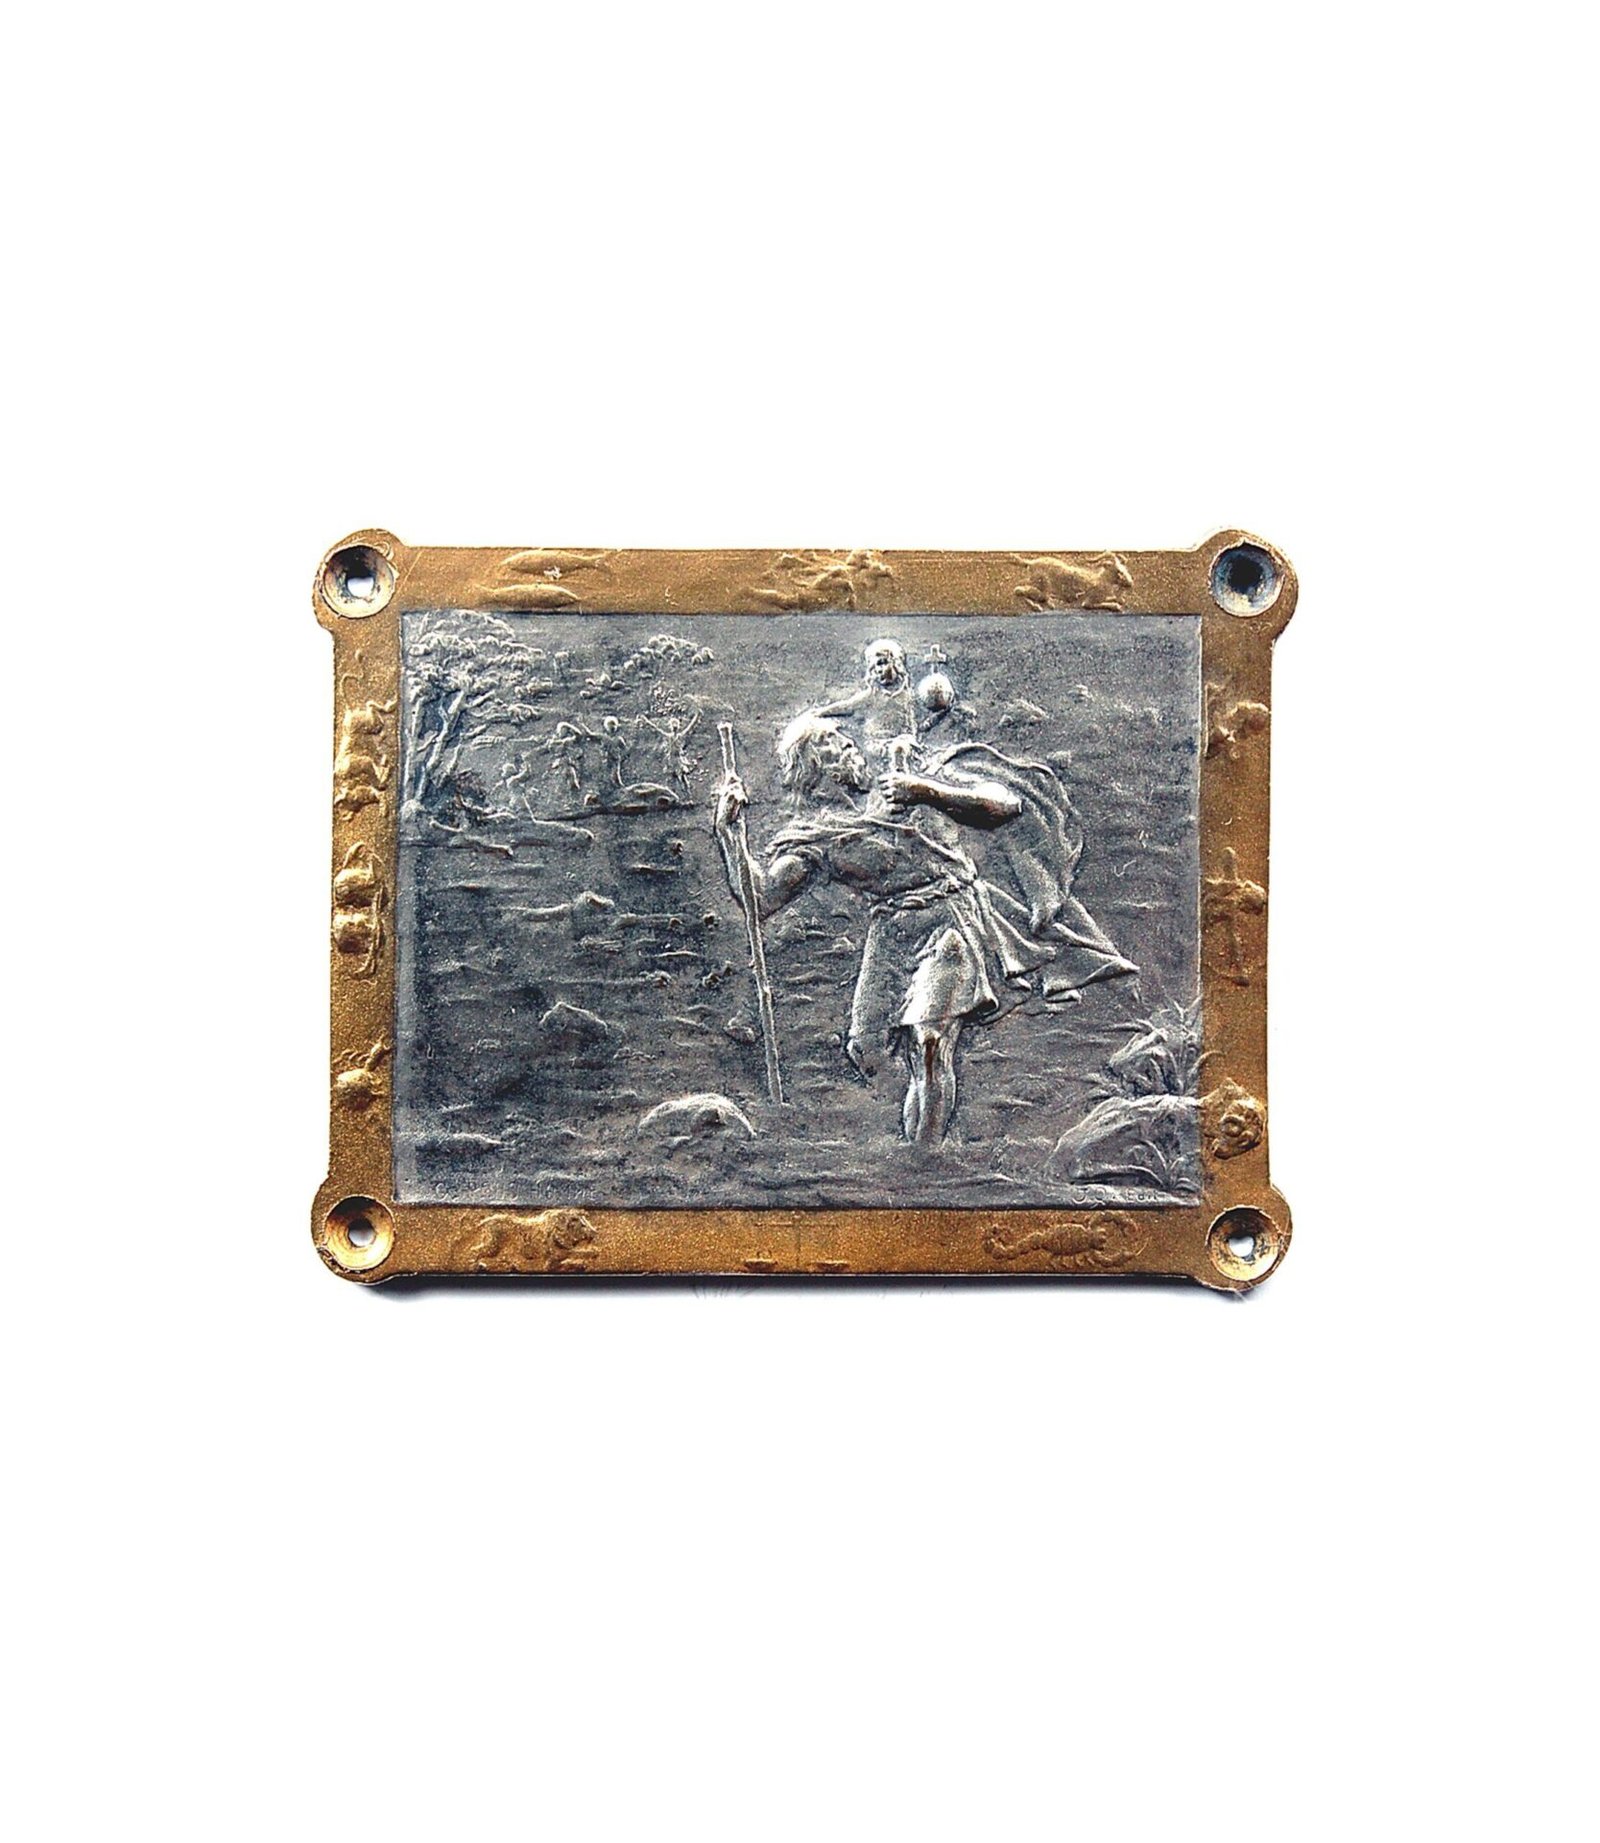 Fine Saint Christopher's dashboard badge by renowned sculptor and engraver, Georges-Henri Prud'homme (1873-1947). Presents the special feature of decorate the religious image with the Zodiac signs on borders. Sometimes is also found as interior car liquor cabinets or ashtrays decoration. Measures 50mm x 40mm aprox. Silver plated bronze with silver and patinated finish. Signed G.Prud'homme and edited by J.Q.